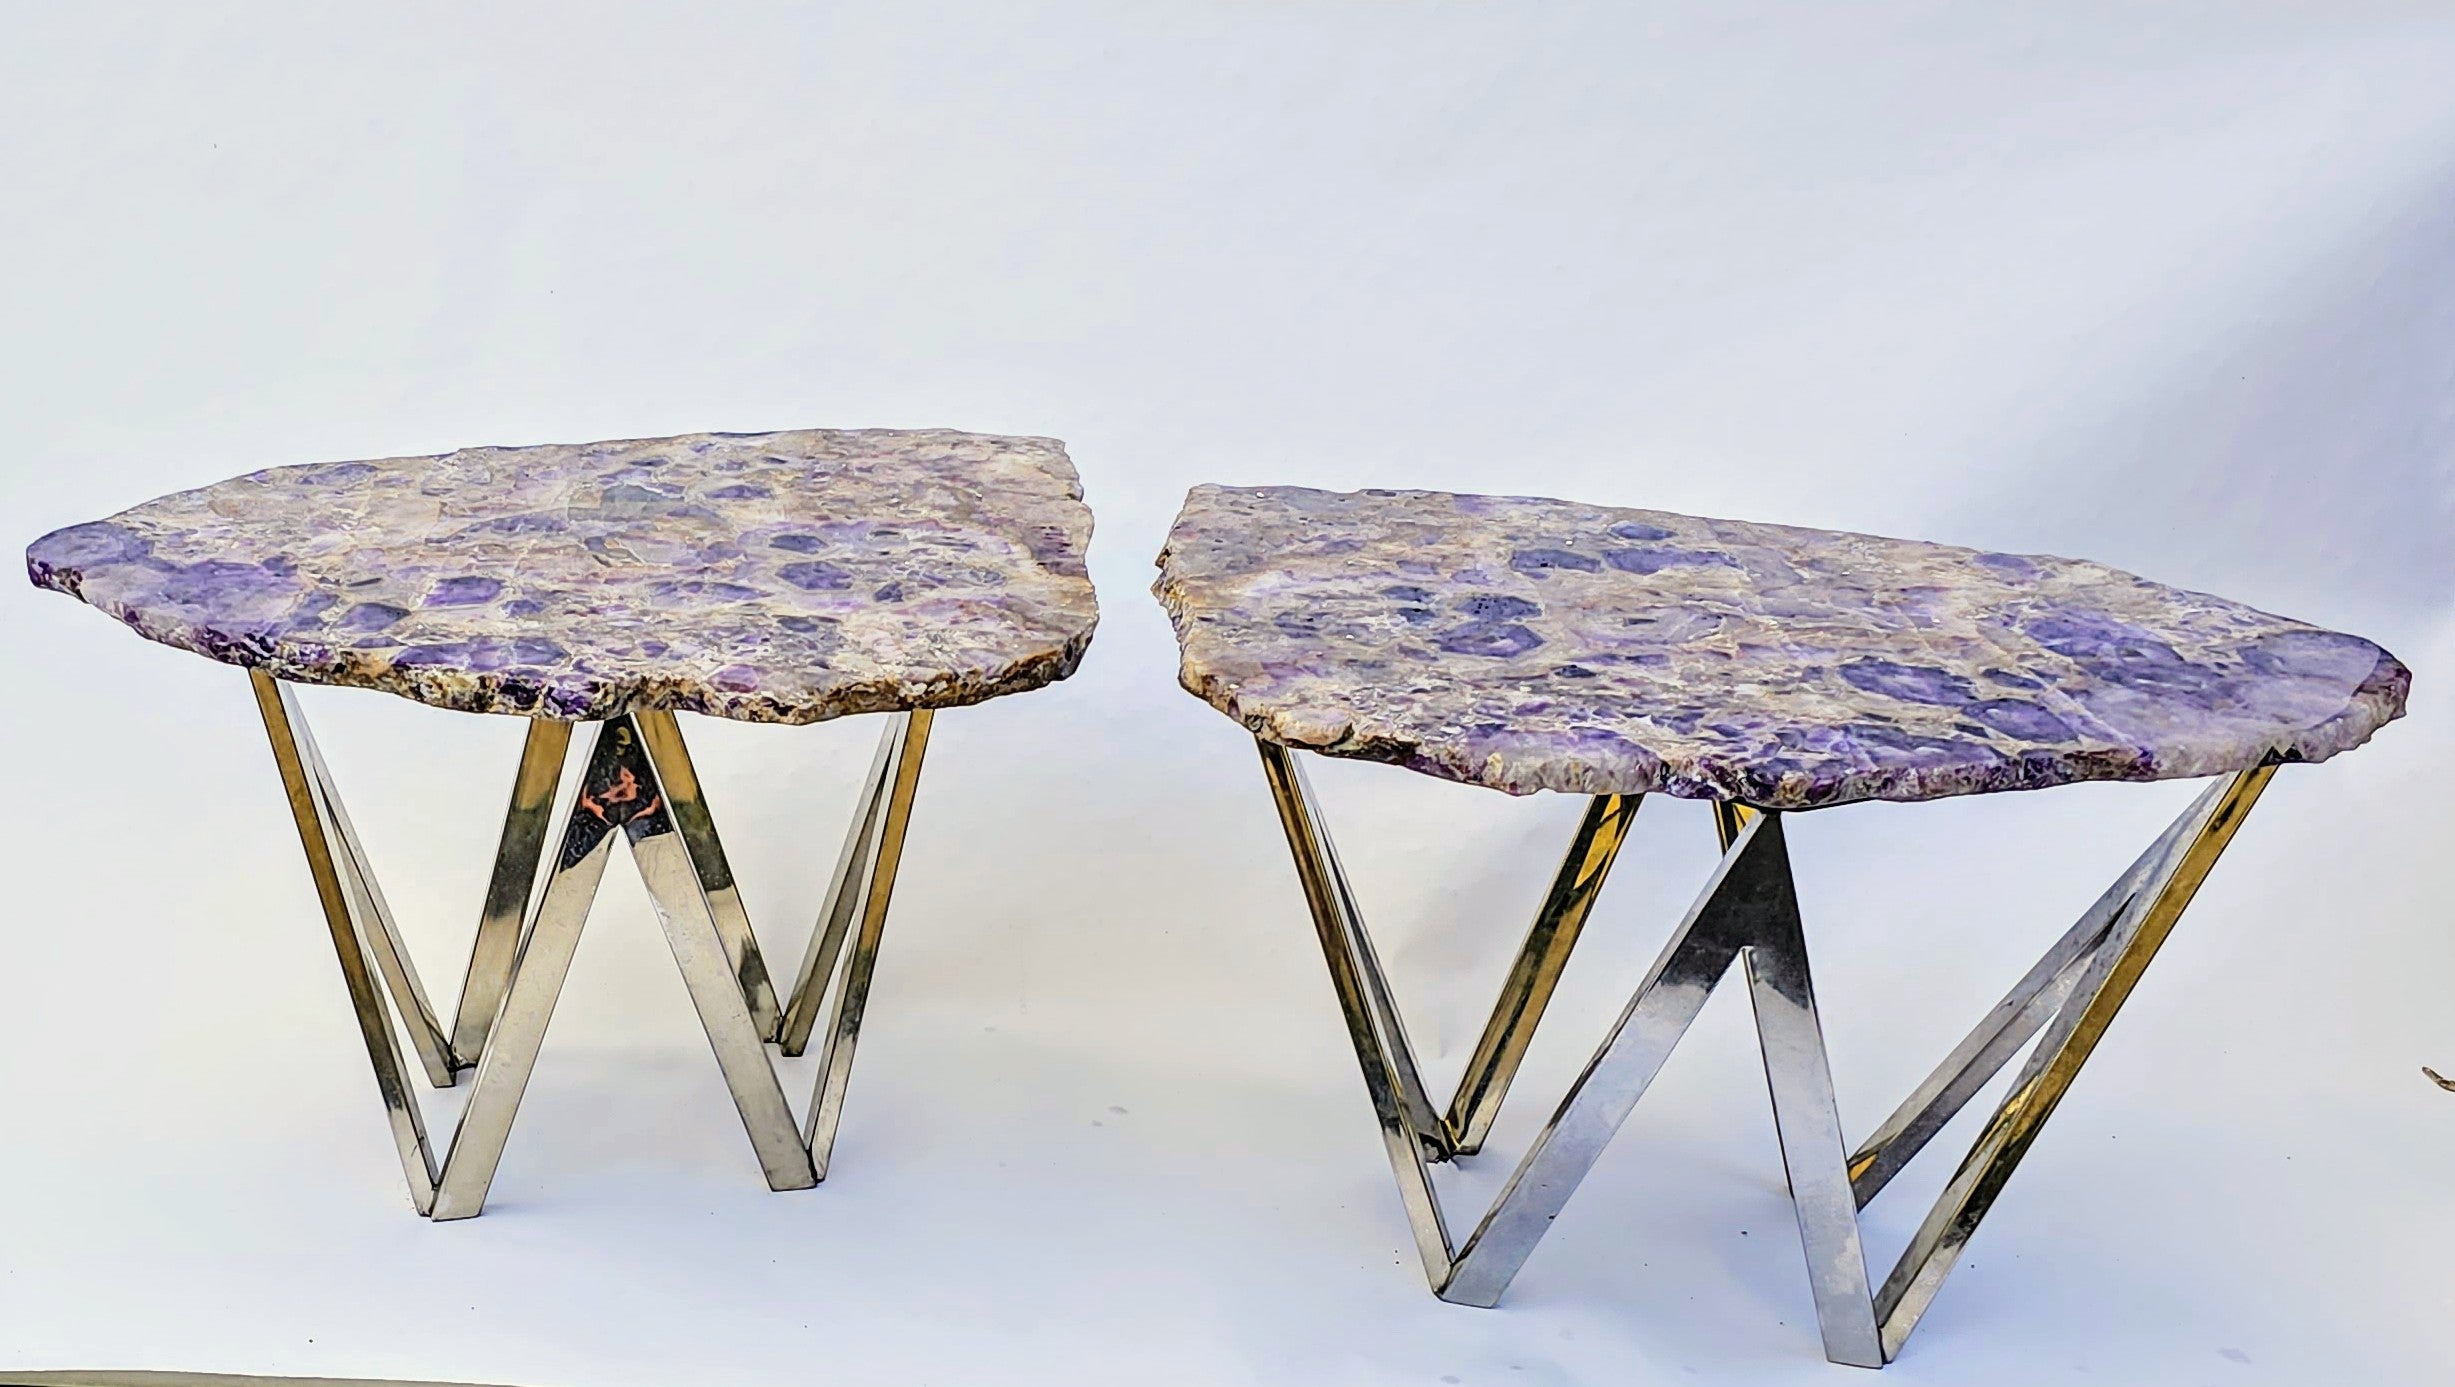 WILD and RARE Siberian Amethyst Table Matched Set With Stainless Steel Diamond Bases (35" x 23.5" x 23" tall, each table) Total Length Nearly 70"